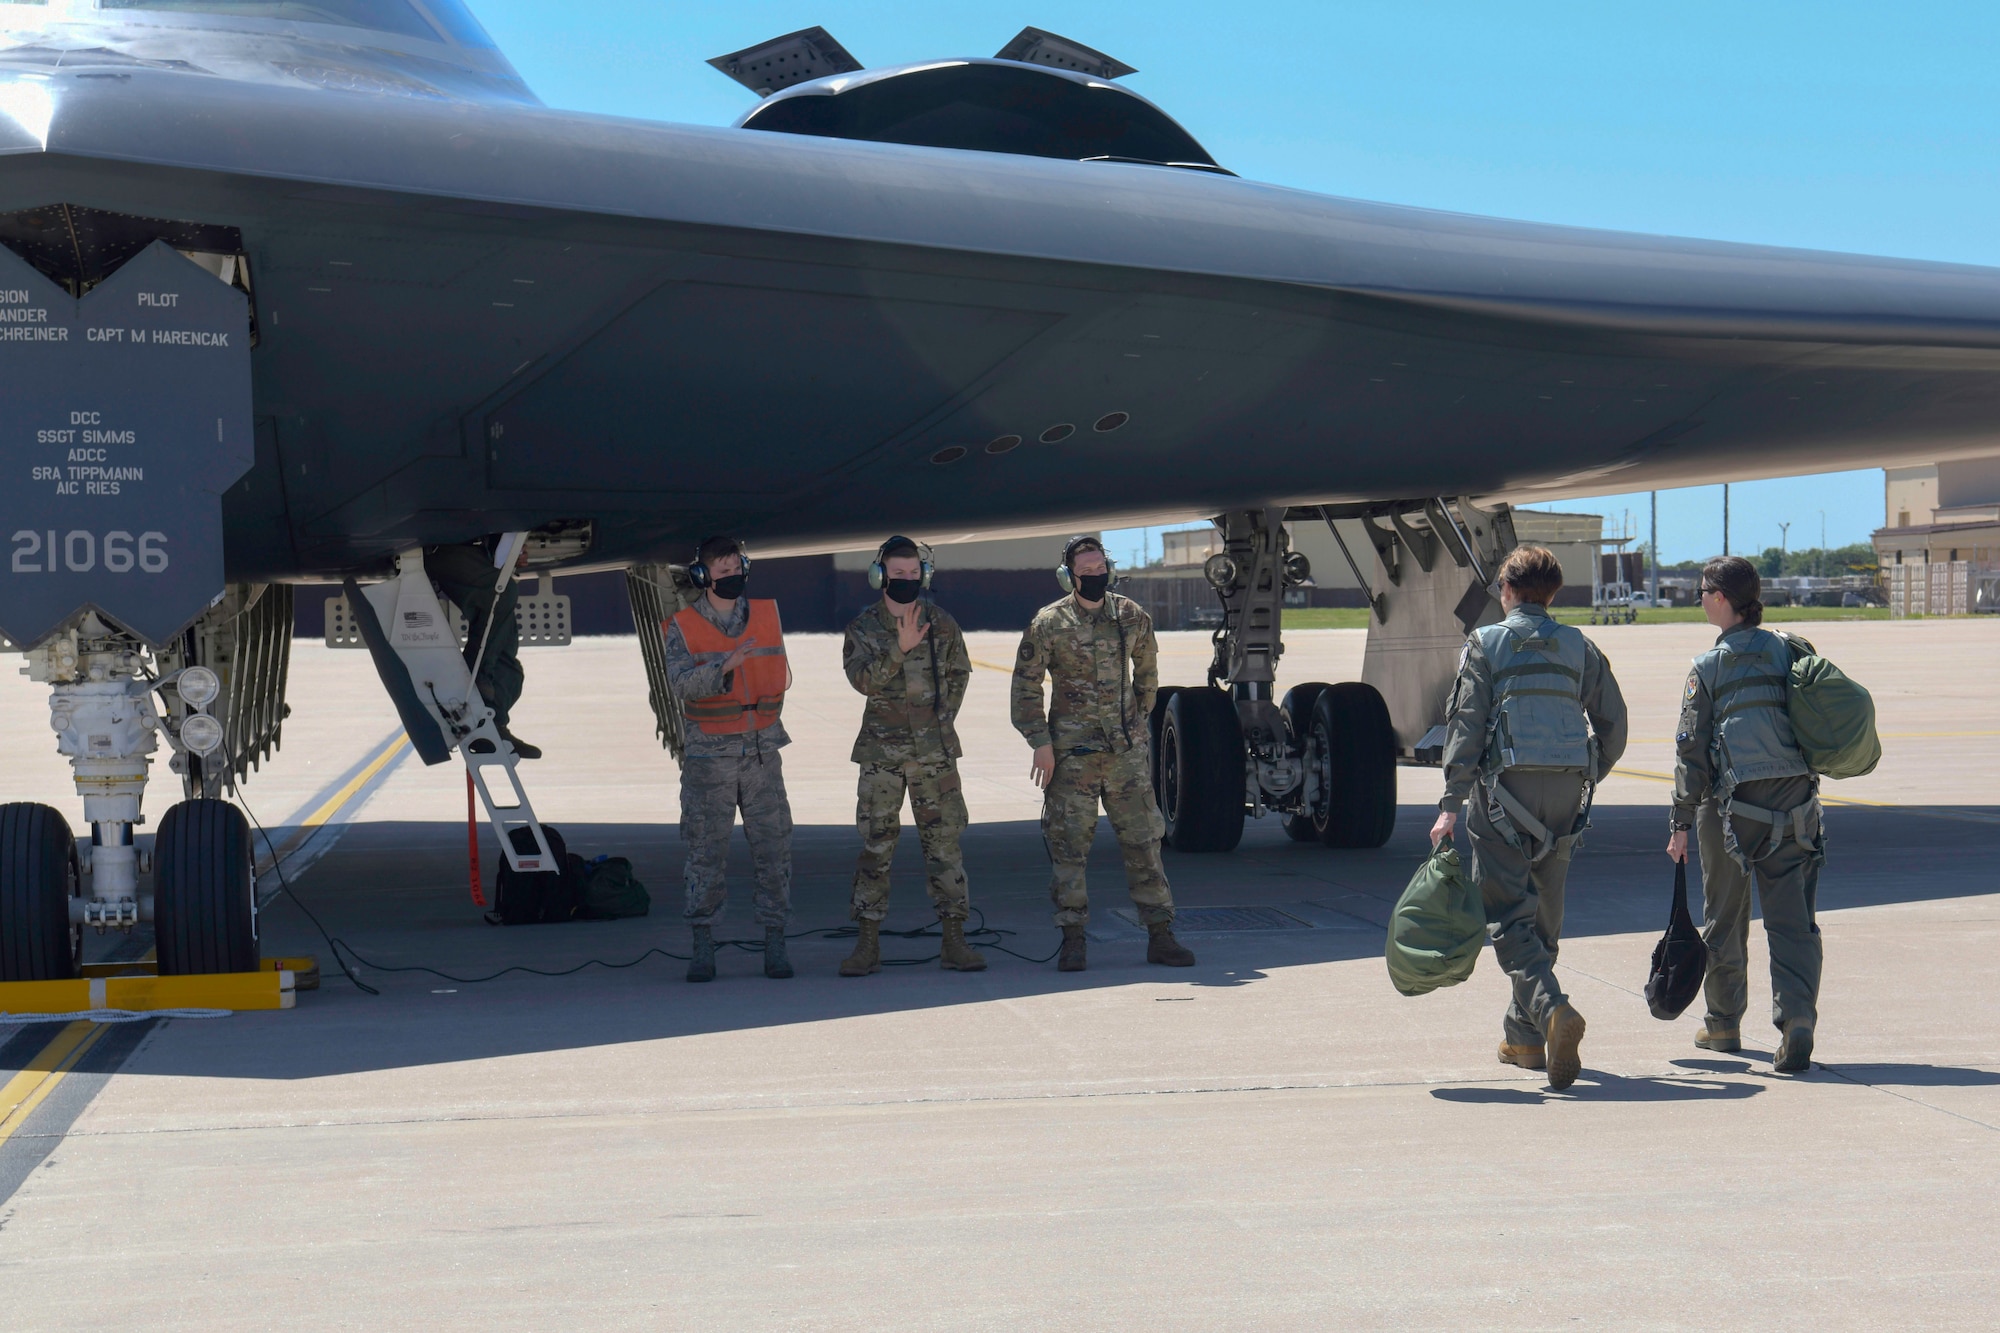 Secretary of the Air Force Barbara Barrett and Lt. Col. Nicola Polidor, the Det. 5, 29th Training Systems Squadron commander and B-2 Spirit stealth bomber pilot, are greeted by 509th Aircraft Maintenance Squadron crew chiefs prior to a familiarization flight for Barrett during a visit at Whiteman Air Force Base, Missouri, June 11, 2020. During her visit, Barrett spoke with base leaders, first responders and maintenance personnel across the installation to learn the B-2 Spirit stealth bomber’s critical role of global deterrence as part of the nuclear triad. (U.S. Air Force photo by Staff Sgt. Dylan Nuckolls)